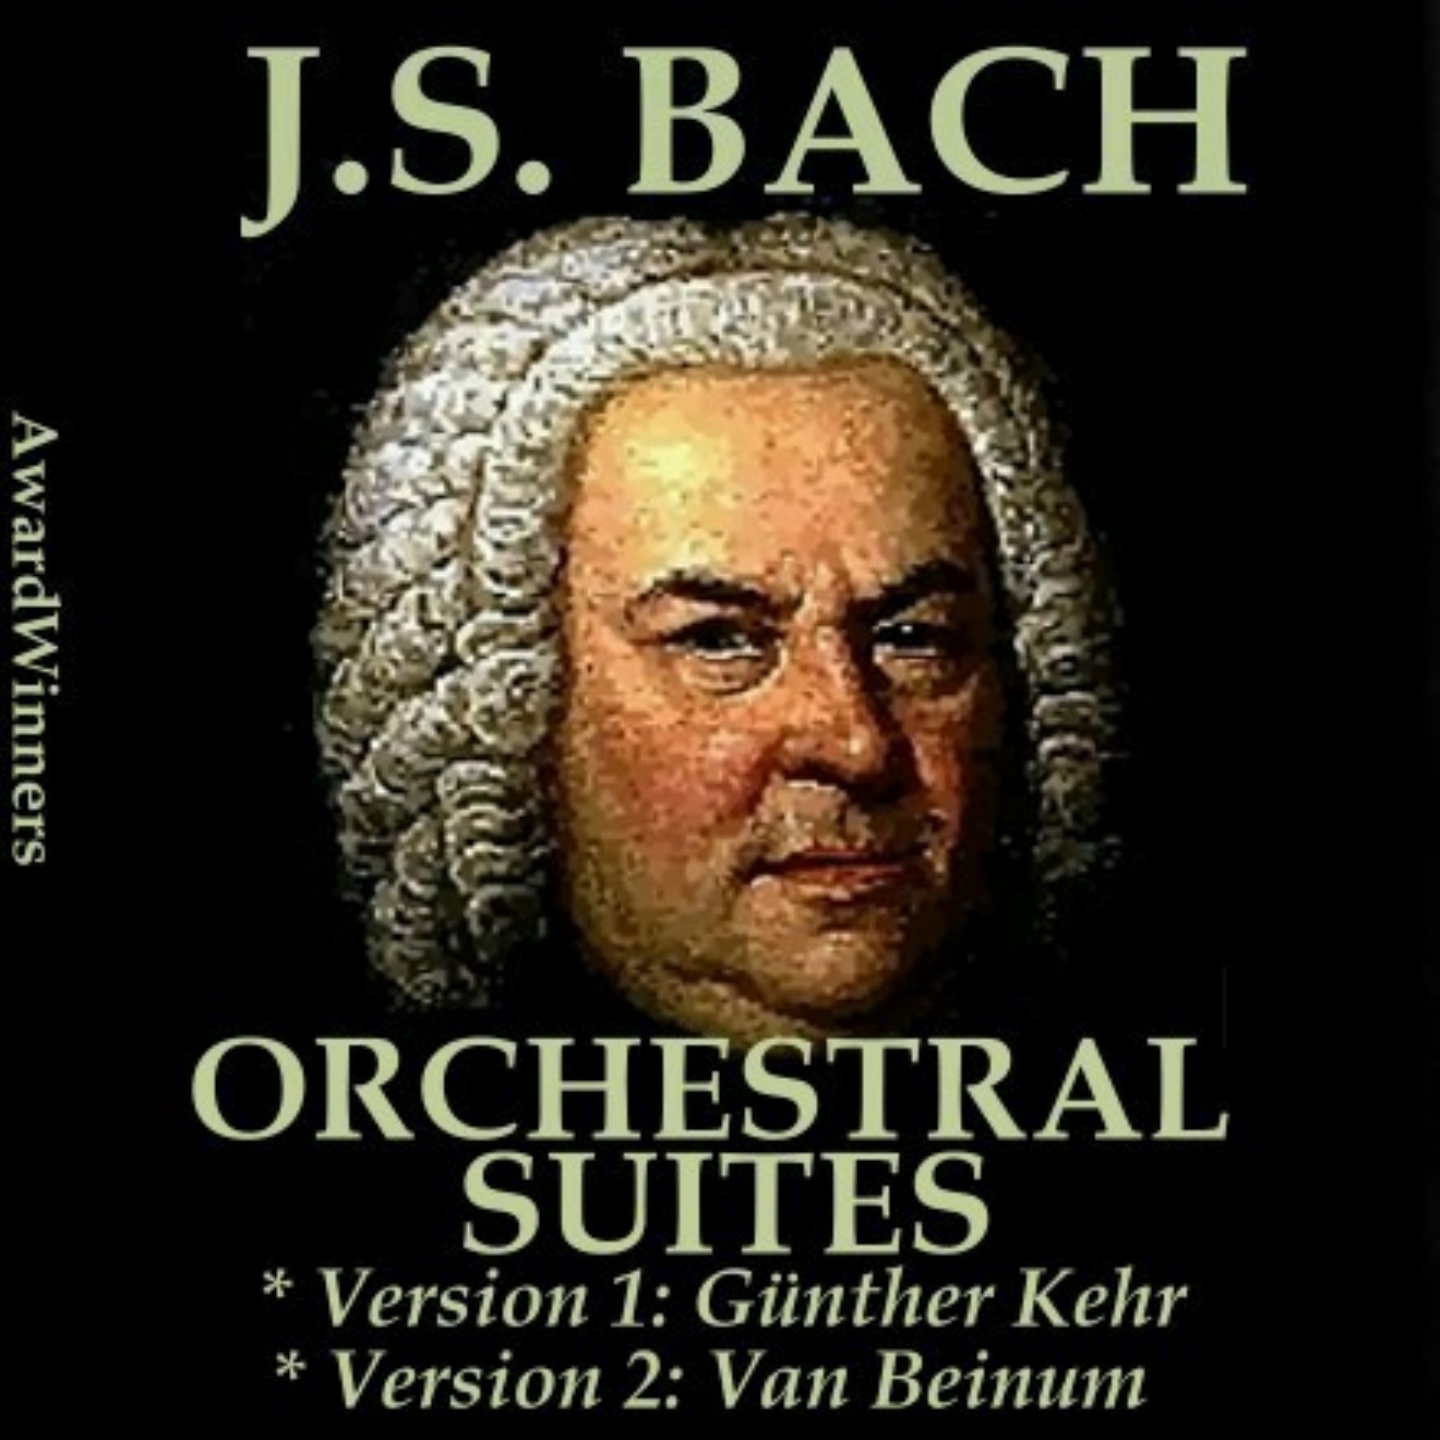 Suite - Overture No. 4 for Orchestra in D Major, BWV1069: I. Overture